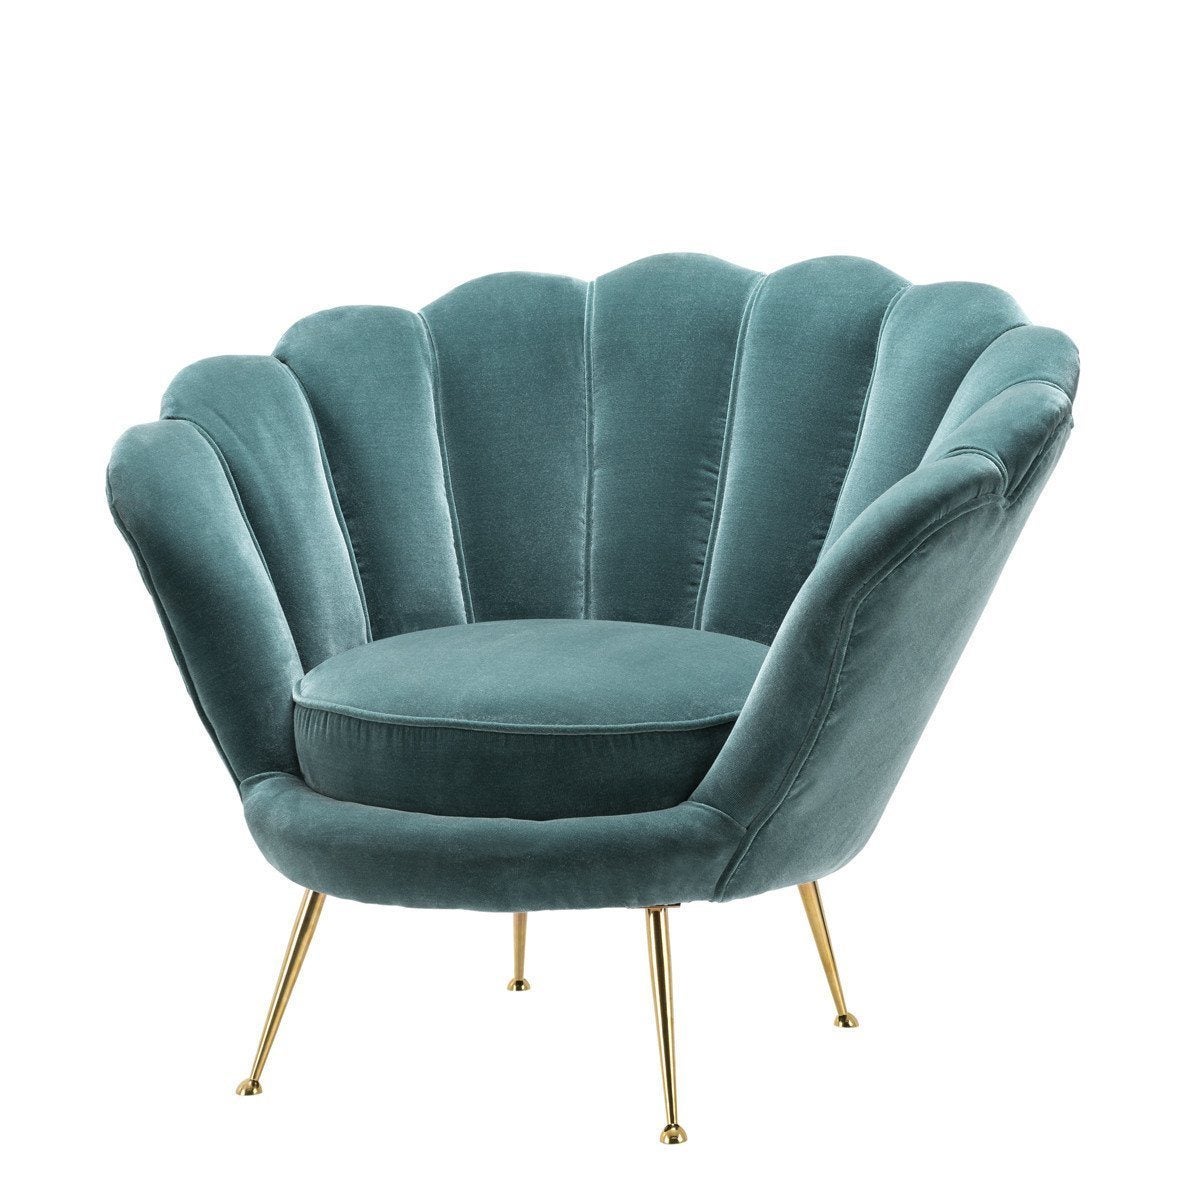 BLUE SCALLOPED CHAIR